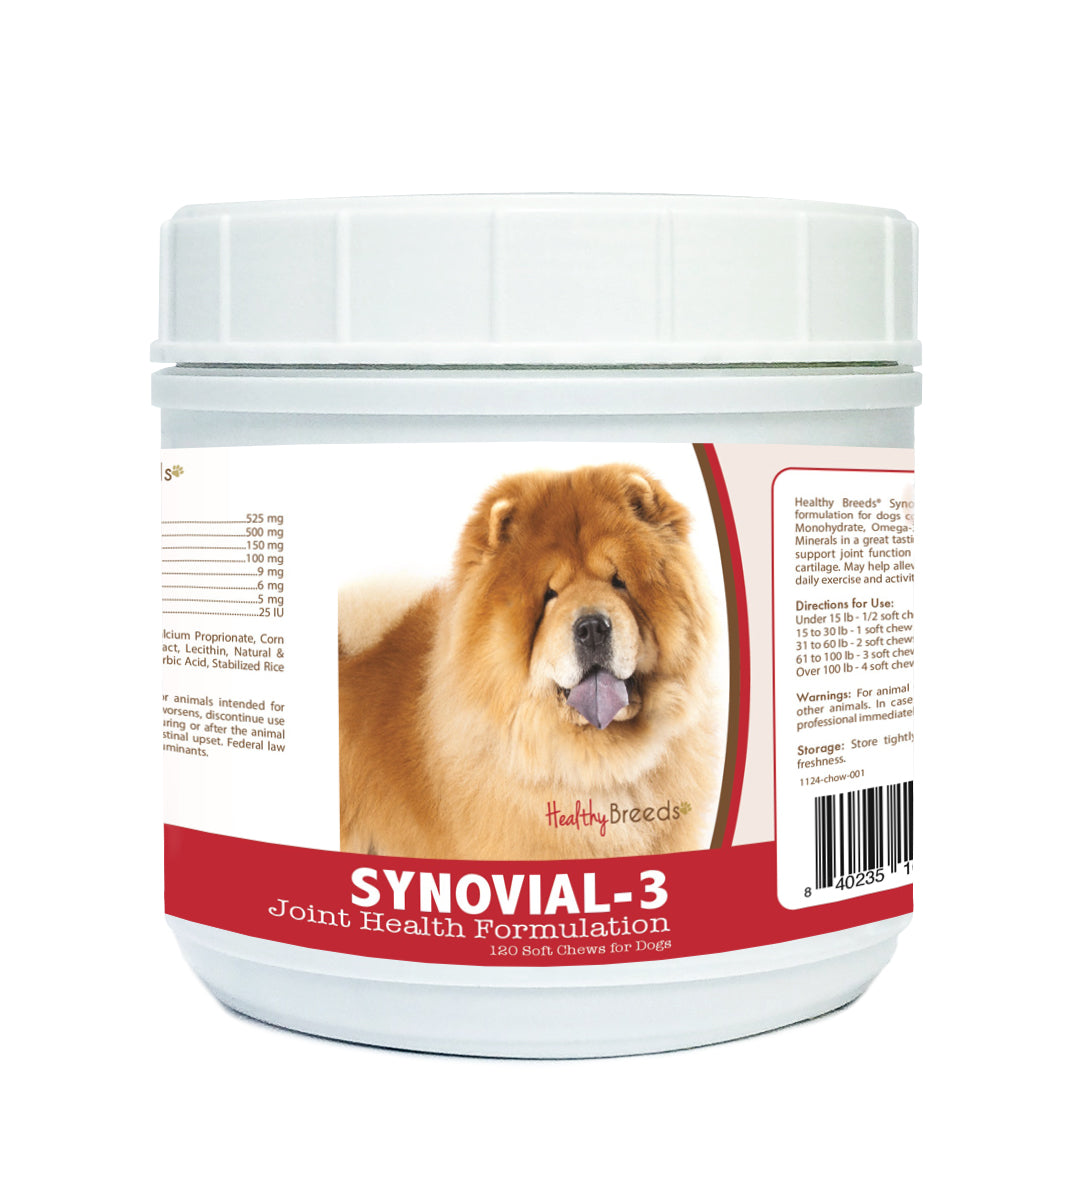 Chow Chow Synovial-3 Joint Health Formulation Soft Chews 120 Count